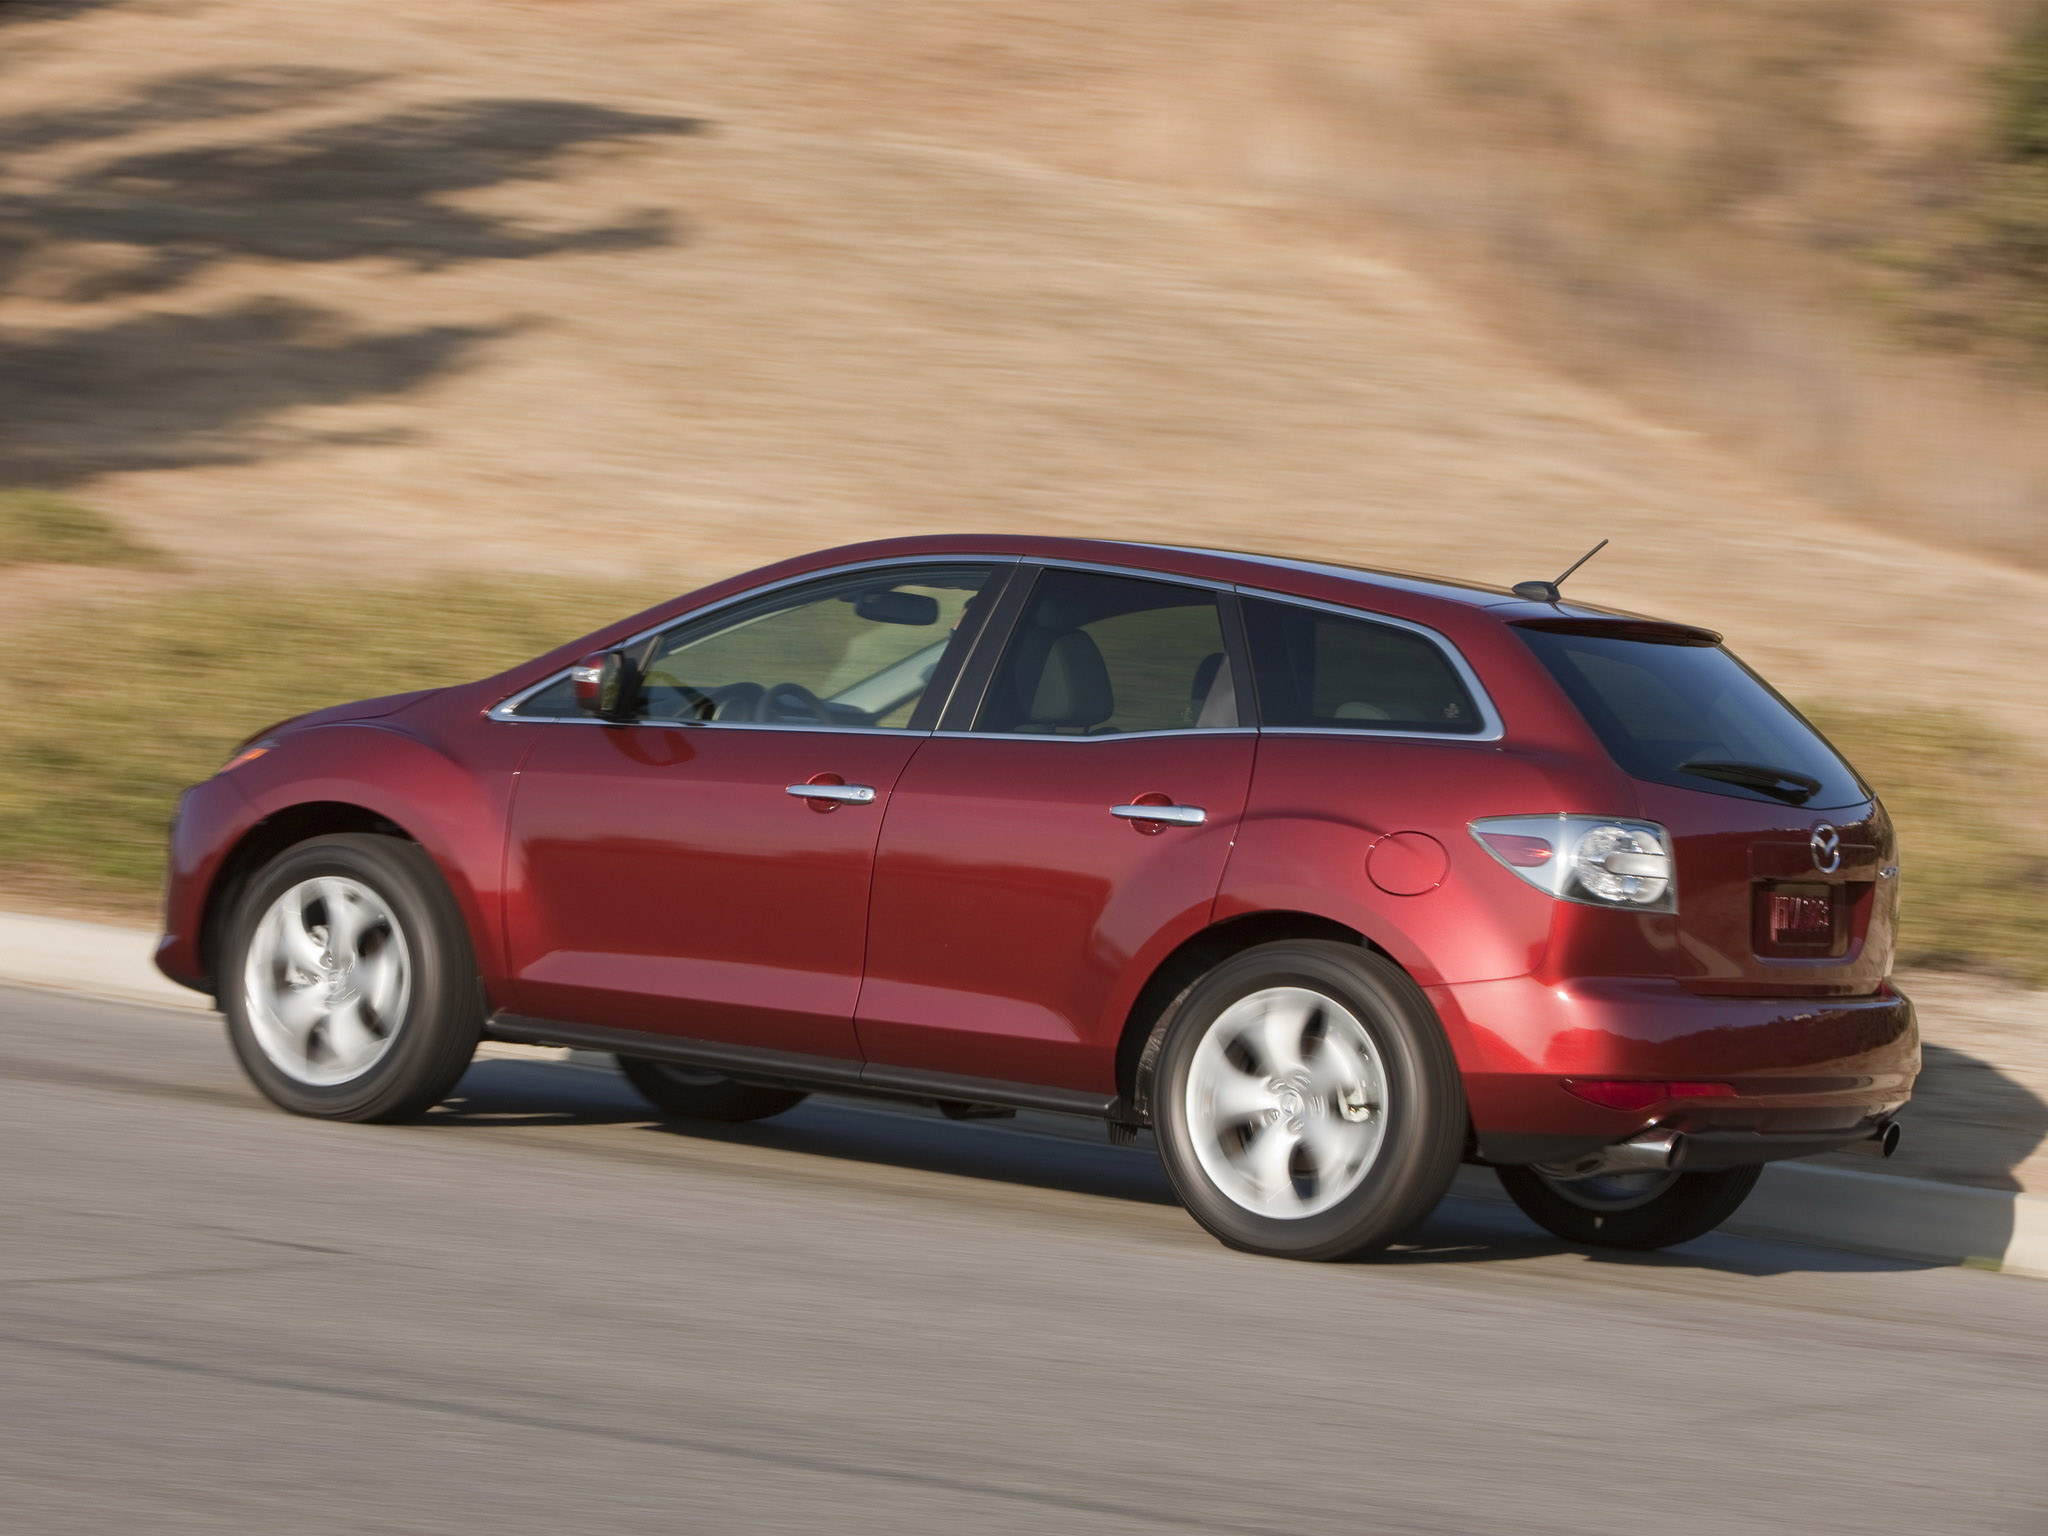 Car in pictures car photo gallery » Mazda CX7 USA 2009